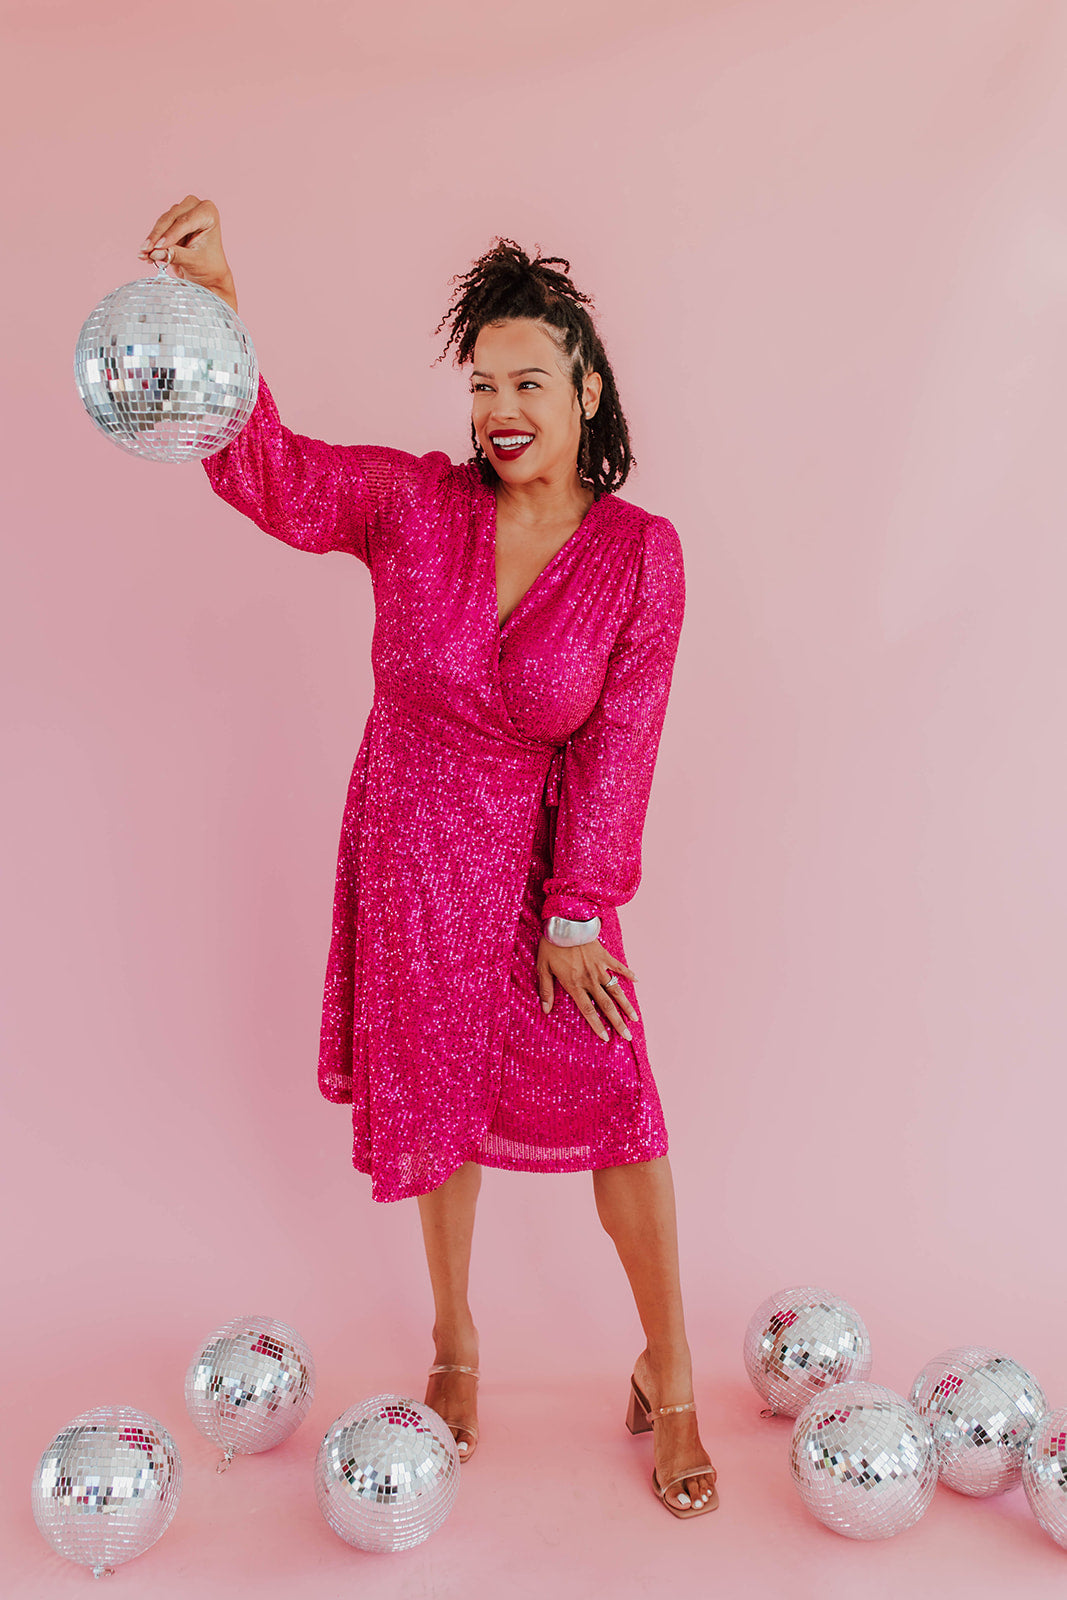 THE SPARKLY SEQUIN WRAP DRESS IN HOT PINK BY SARAH TRIPP X PINK DESERT